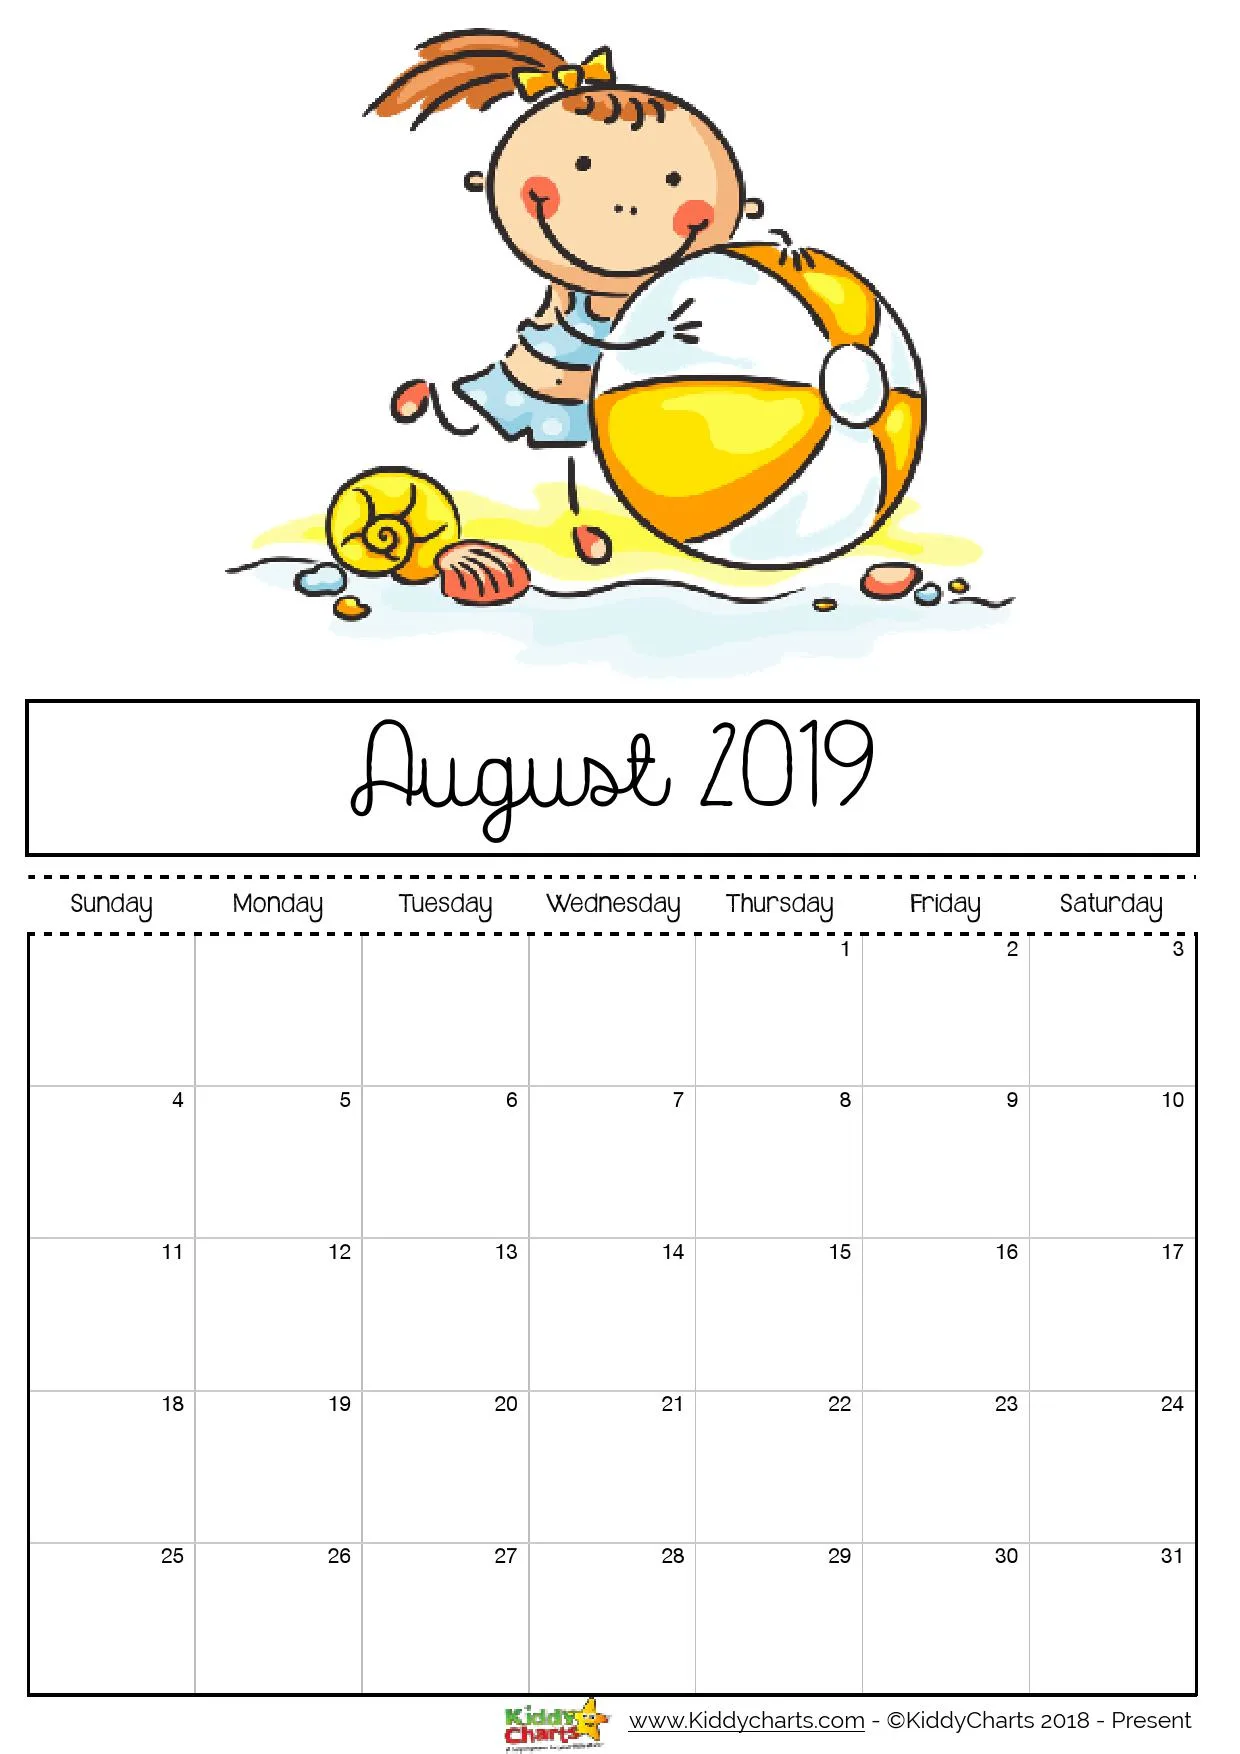 August printable 2019 calendar; little girl on the beach with a beach ball. We hope you manage to get to the beach too in 2019! #printables #kidsprintables #2019calendar